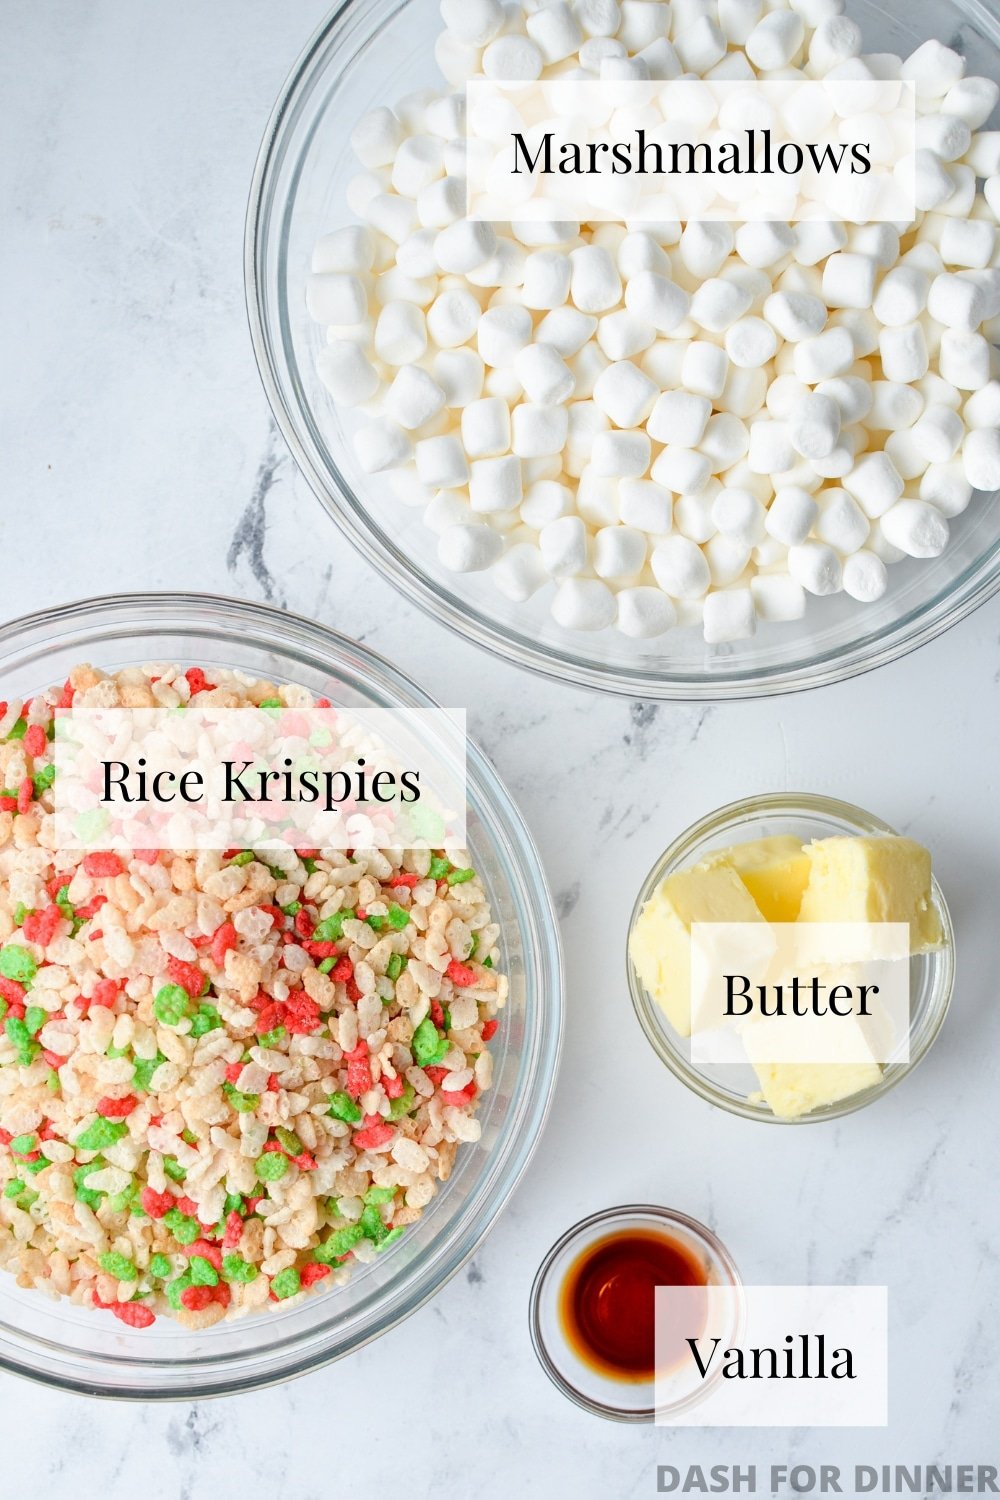 The ingredients need to make Rice Krispies treats: cereal, marshmallows, butter, and vanilla.